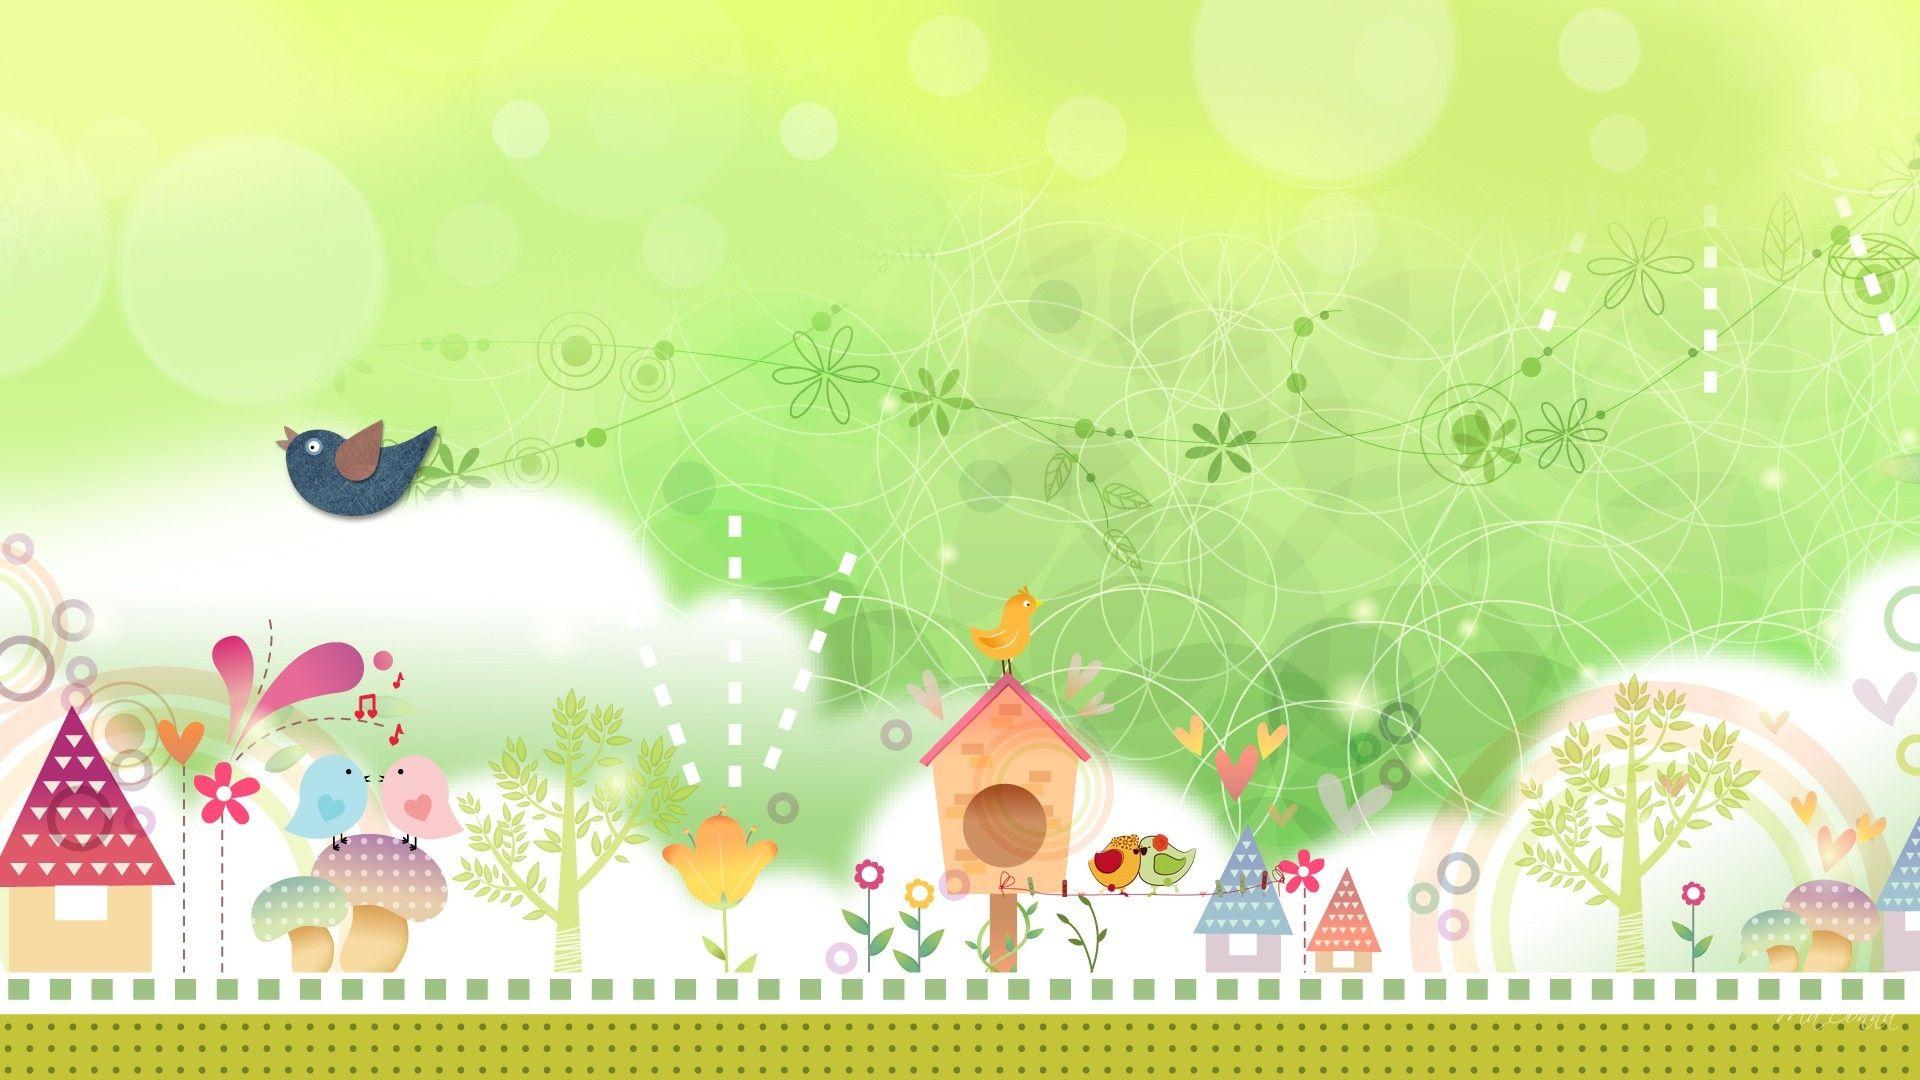 Whimsical Tag wallpaper: Berries Frost Post Leaves Sweet Cold